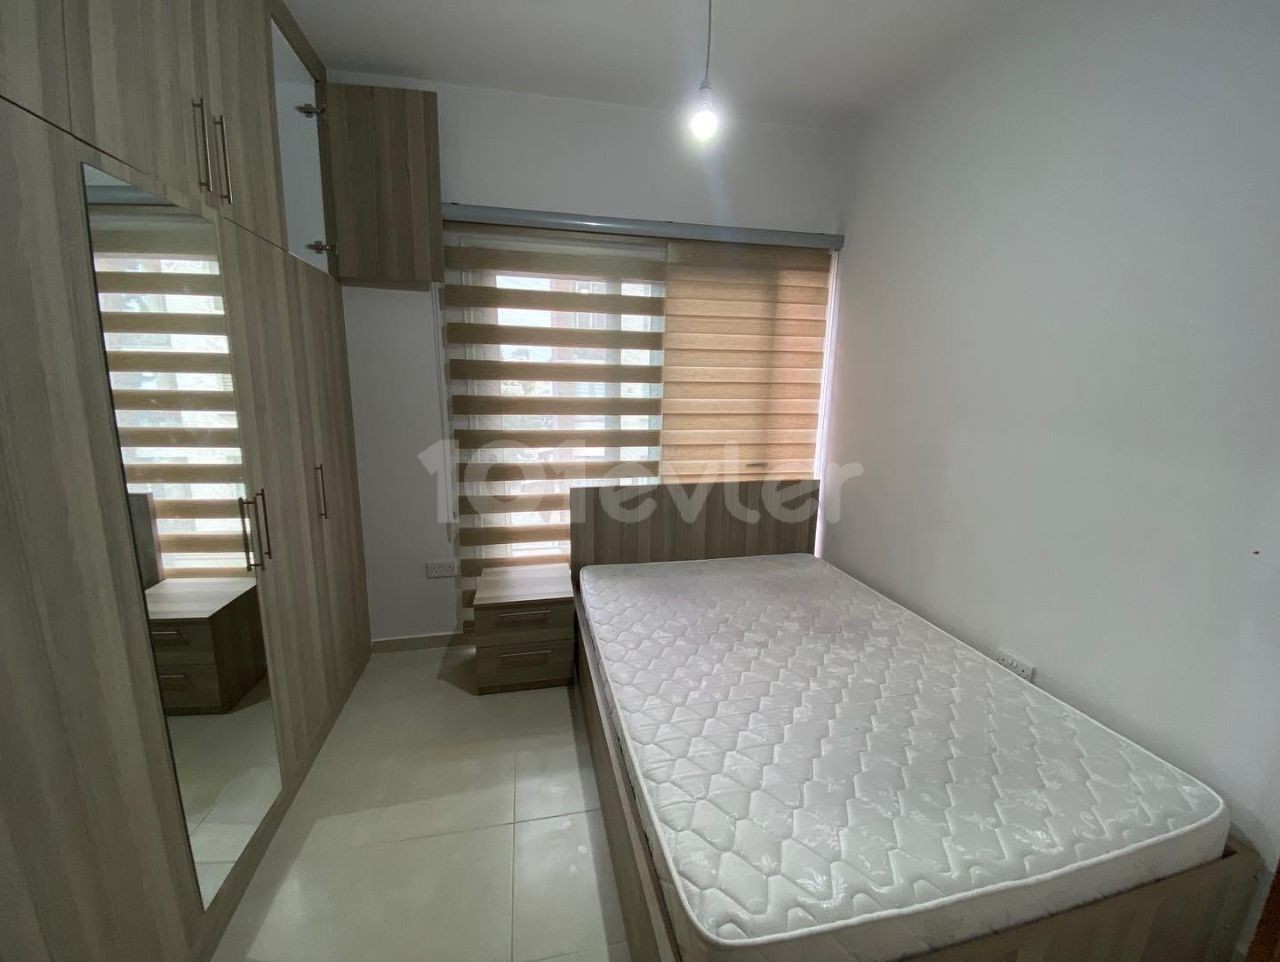 1+1 FULLY FURNISHED FLAT FOR RENT IN KYRENIA CENTER UNDER SULU CIRCLE. PEACE 05338376242